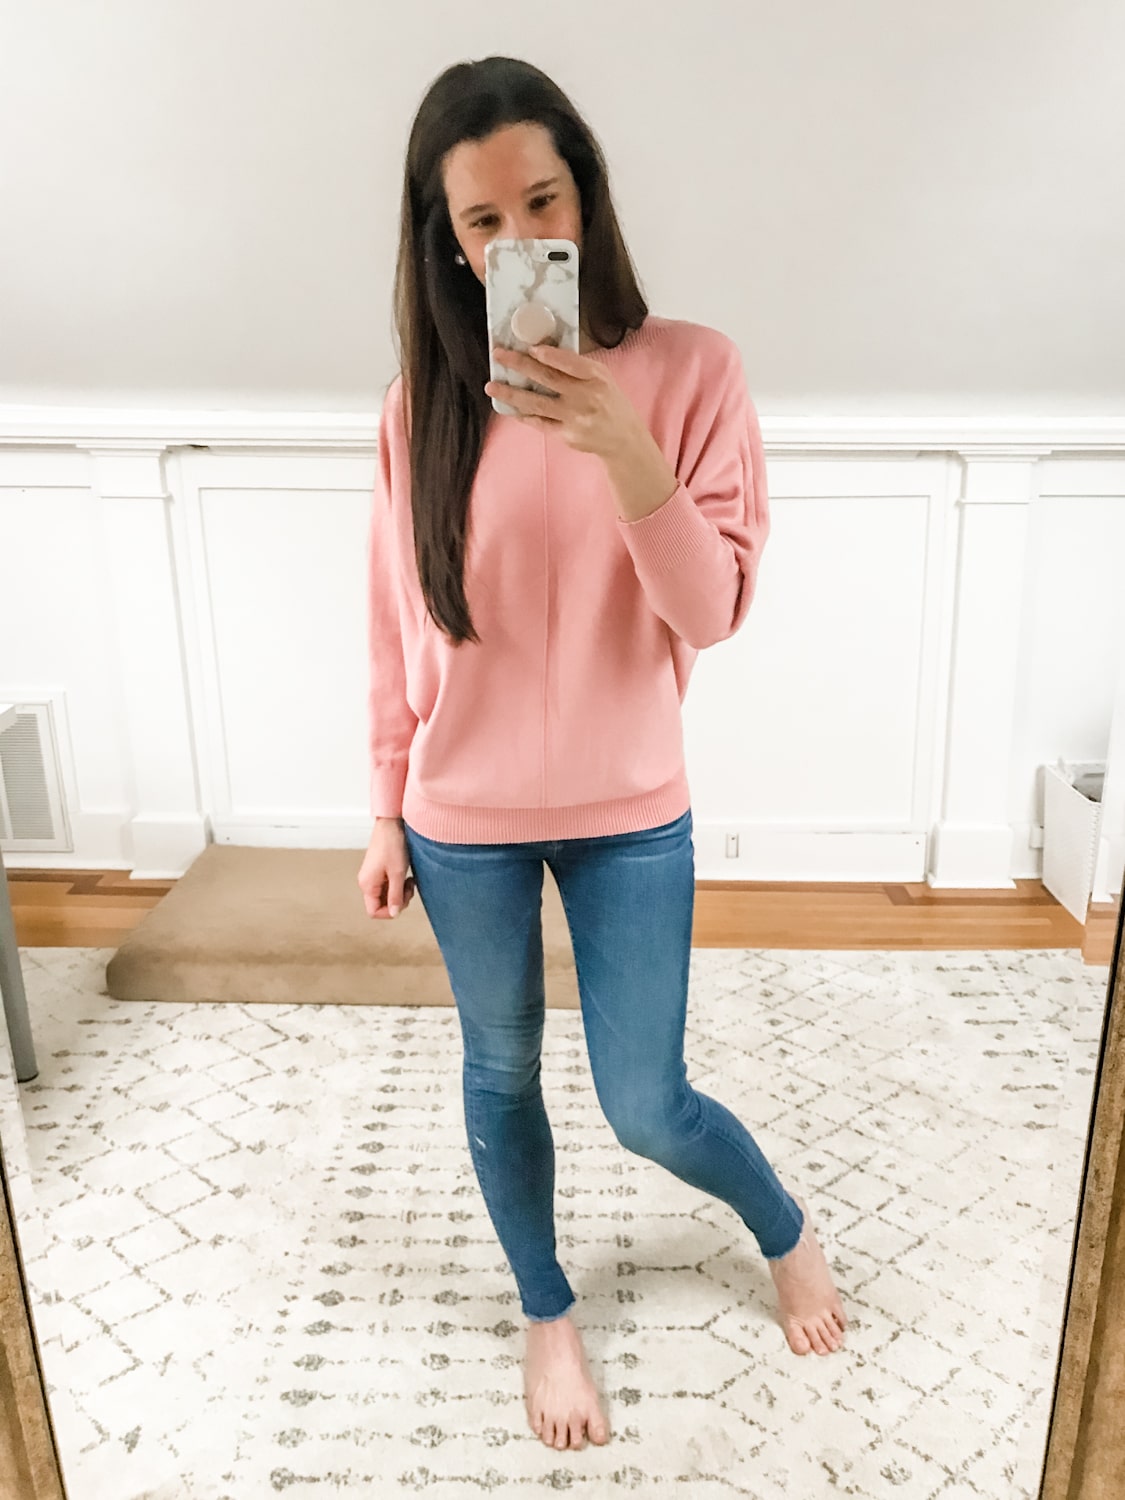 Amazon Ckikiou Womens Batwing Sleeve Pullover Sweater in Pink worn by affordable fashion blogger Stephanie Ziajka of Diary of a Debutante